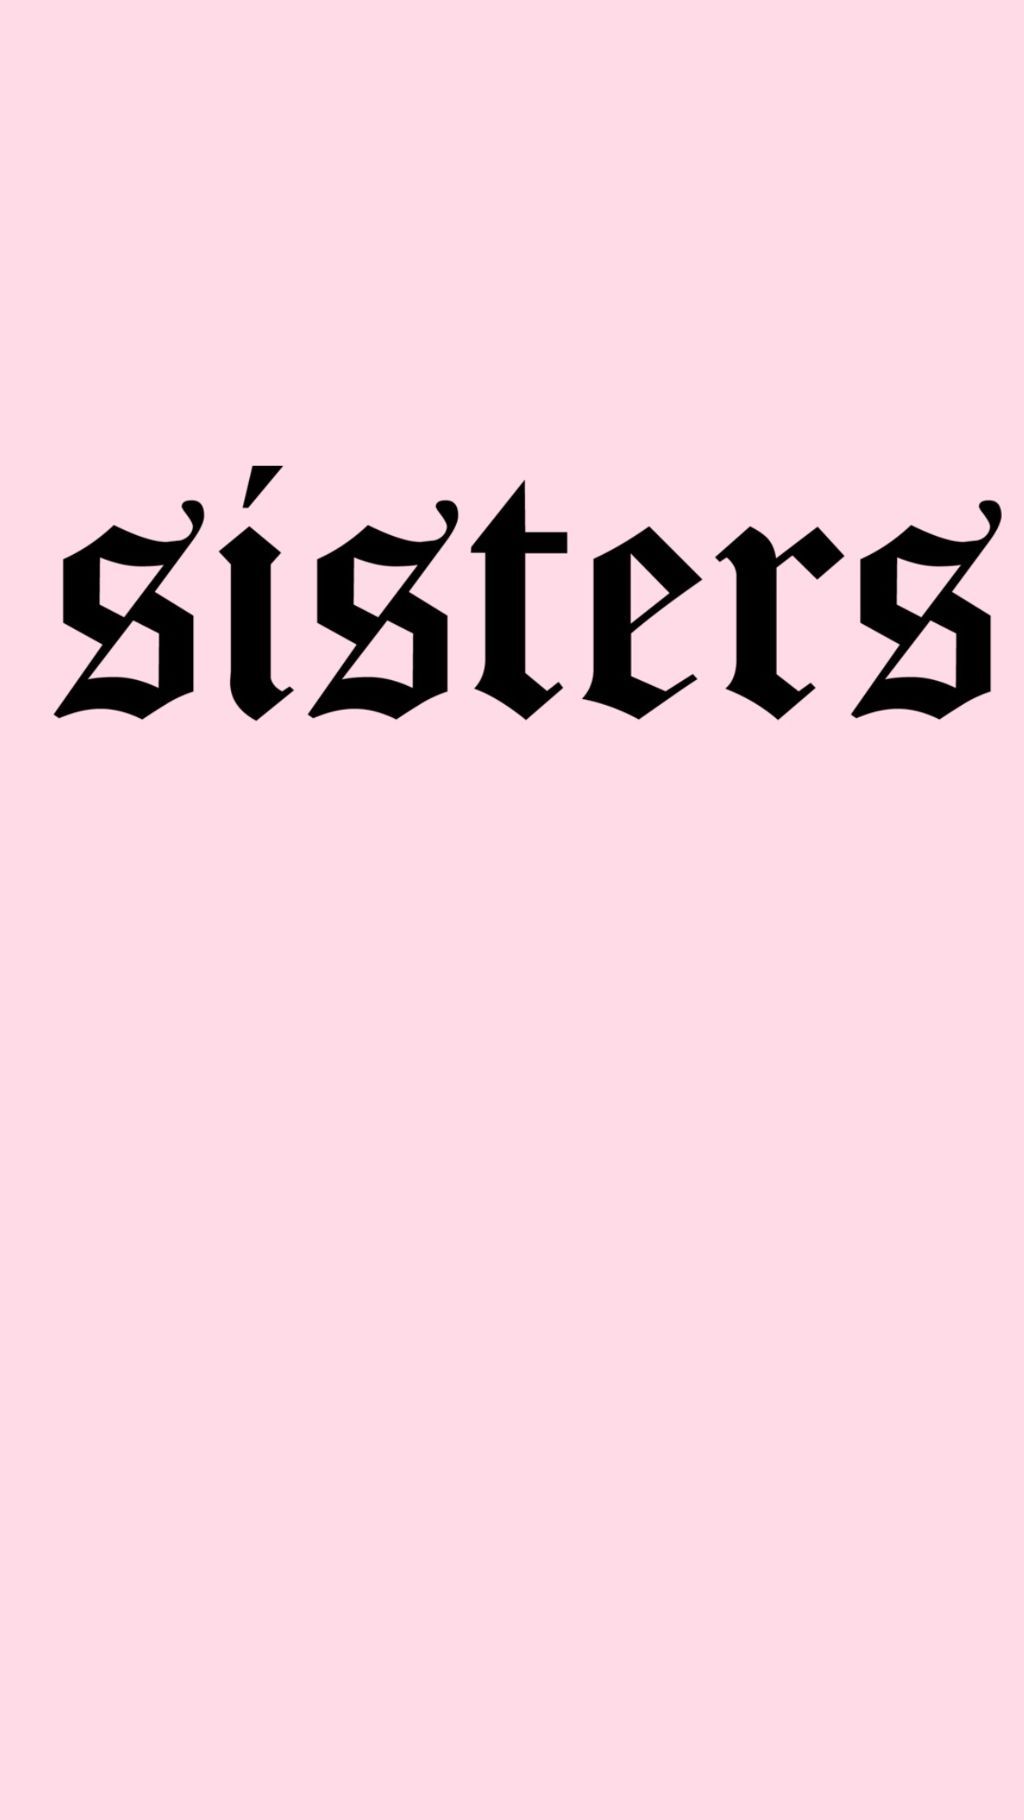 Sister backgrounds